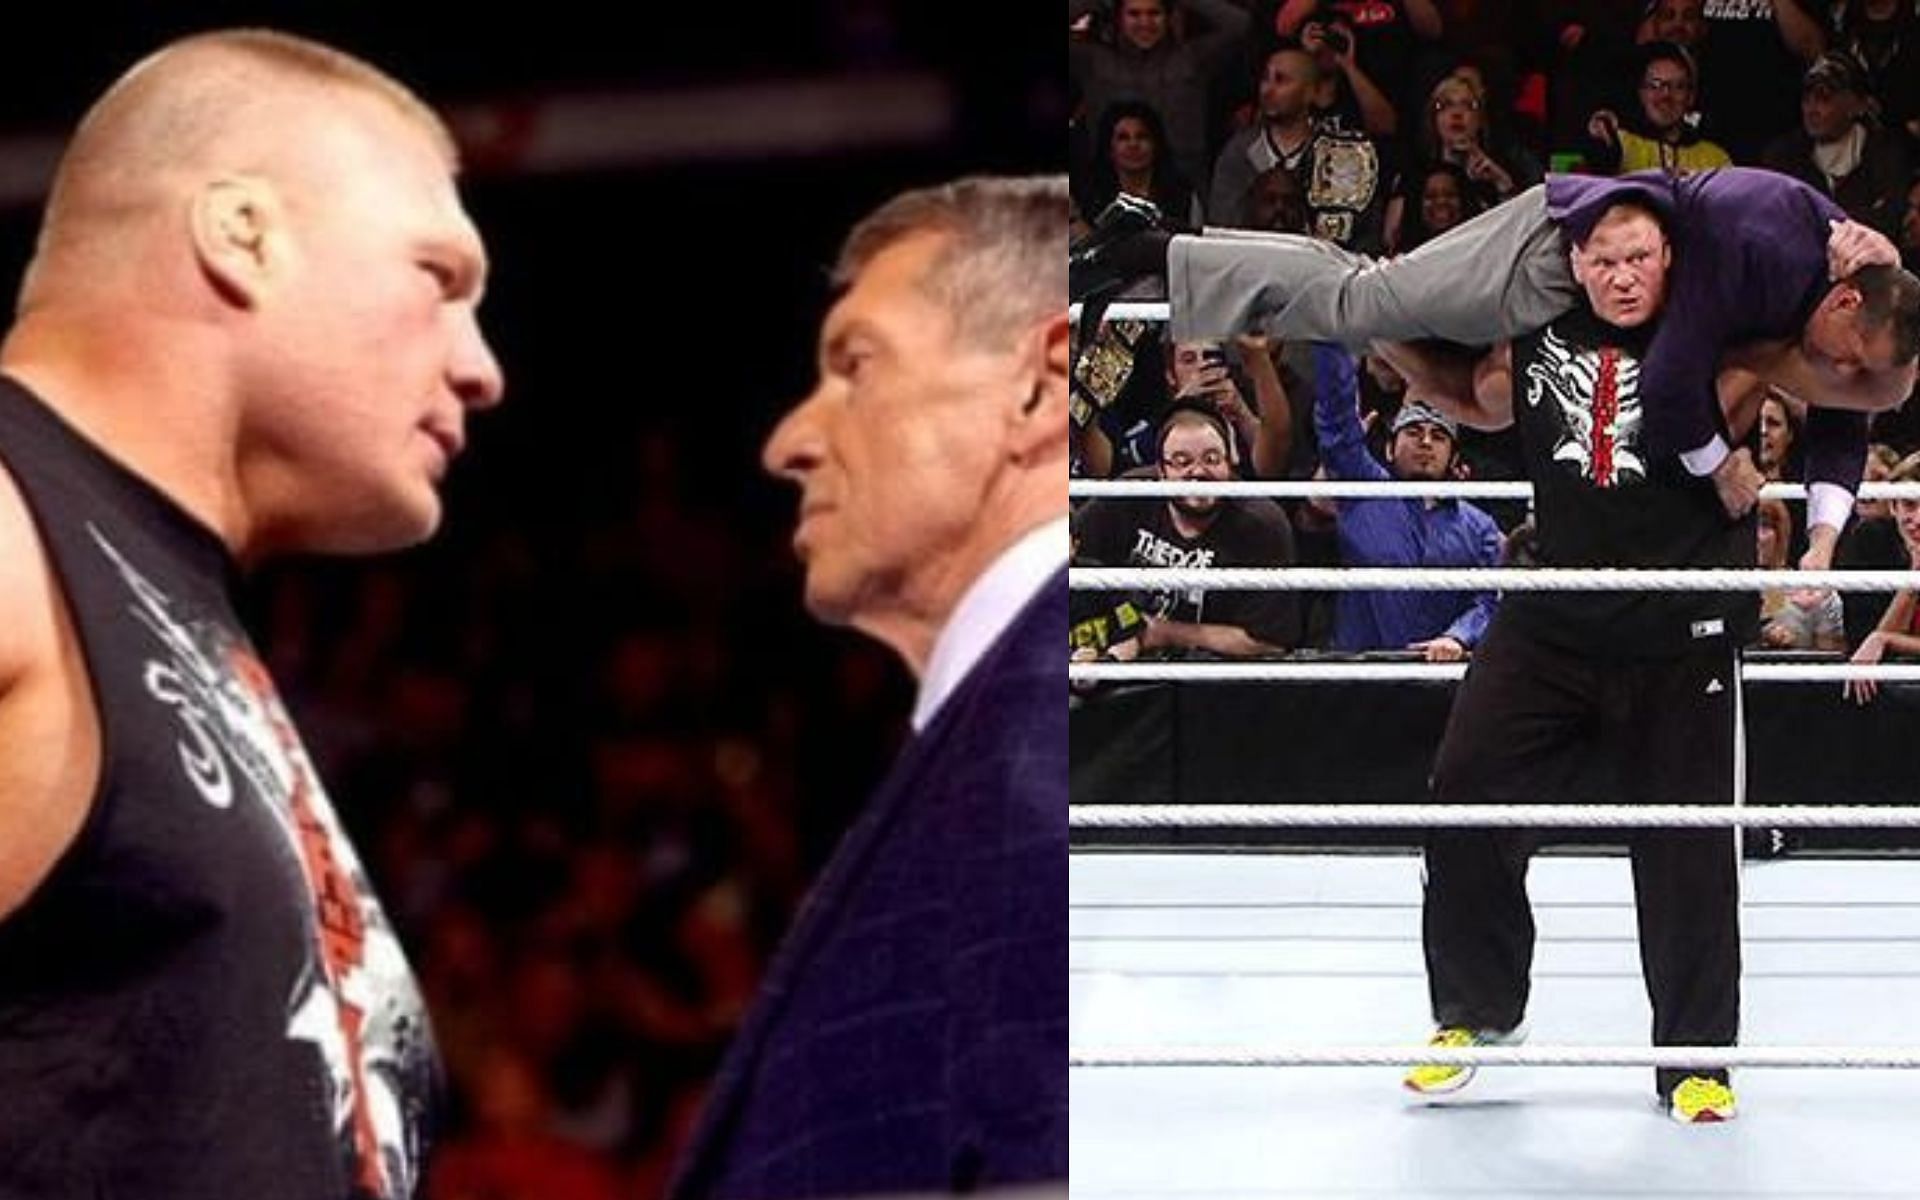 Vince McMahon is no stranger to Brock Lesnar